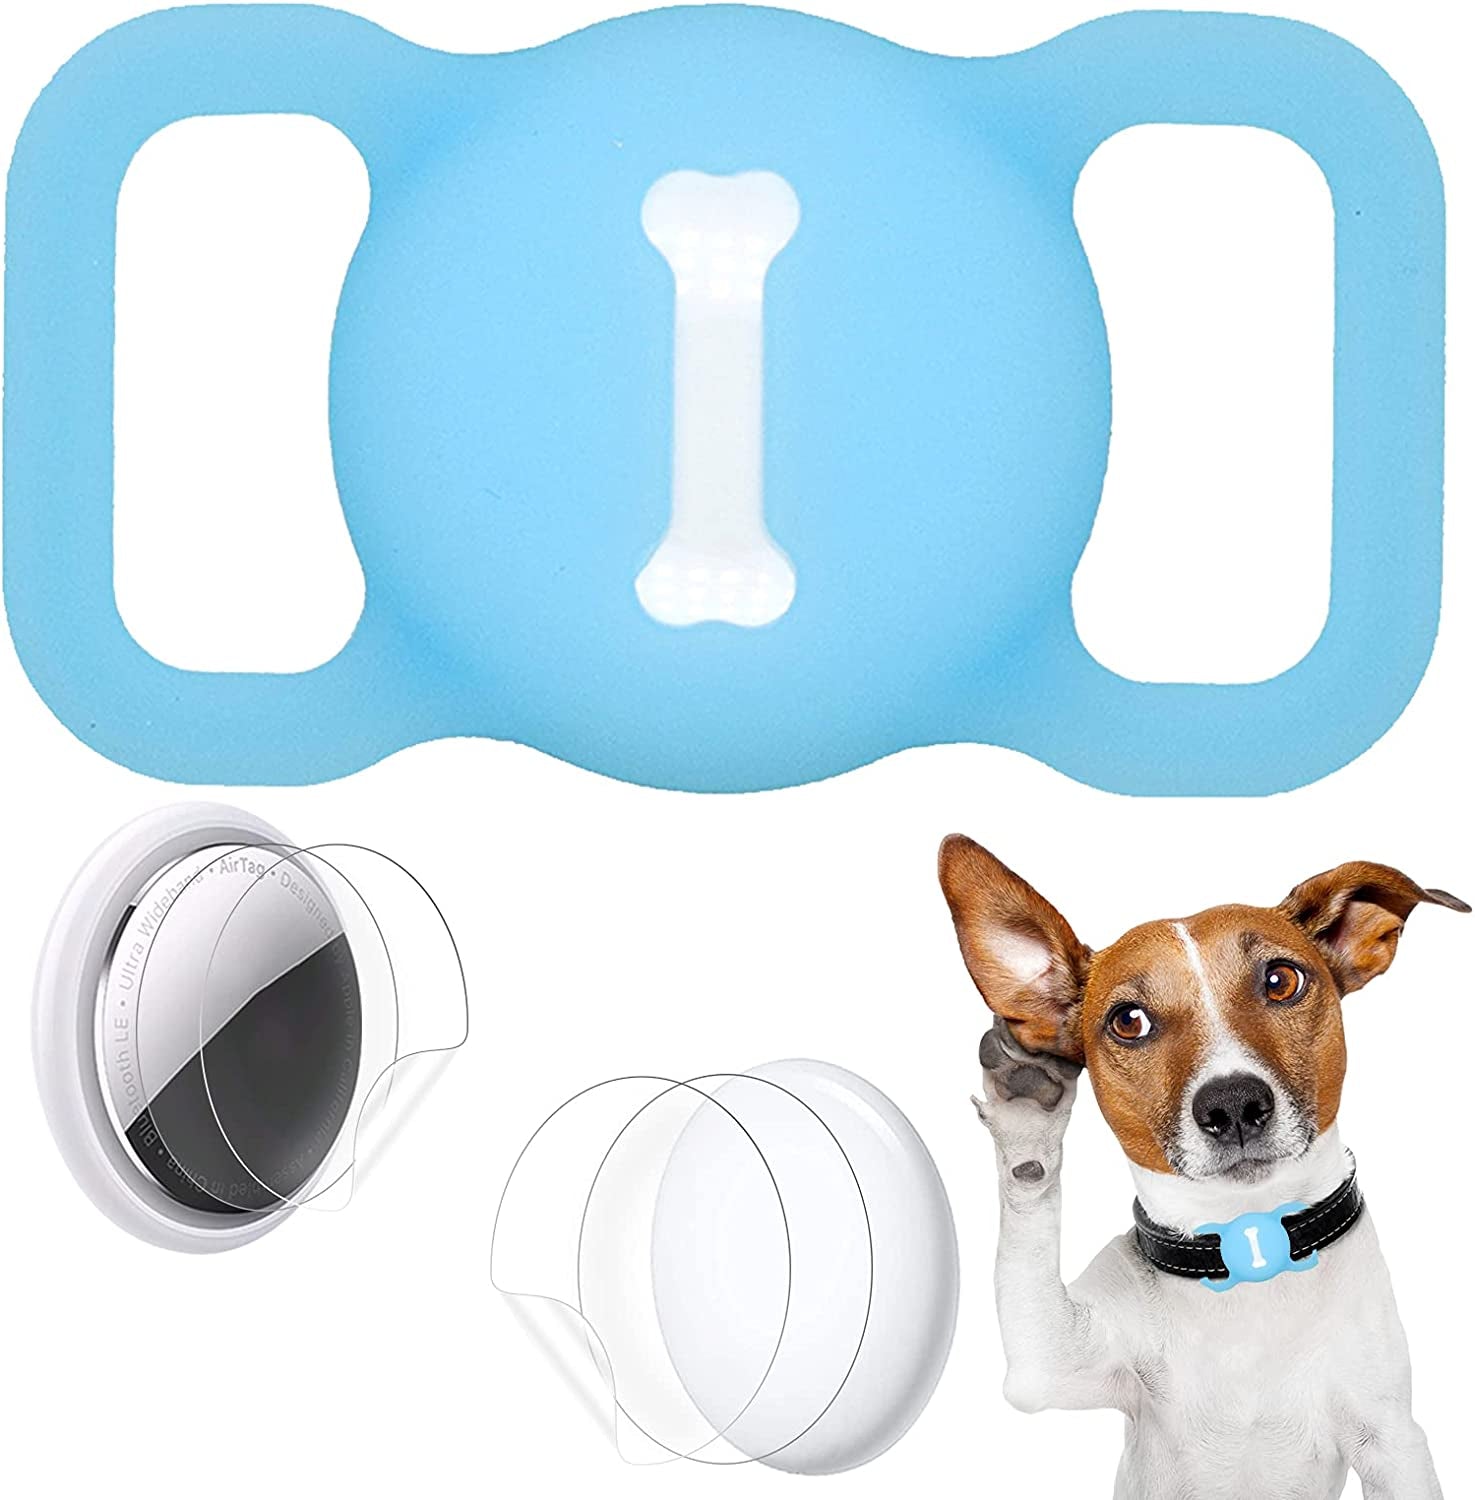 Protective Case Compatible for Apple Airtags for Dog Cat Collar Pet Loop Holder, Airtag Holder Accessories with Screen Protectors, Air Tag Silicone Cover for Pet Collar